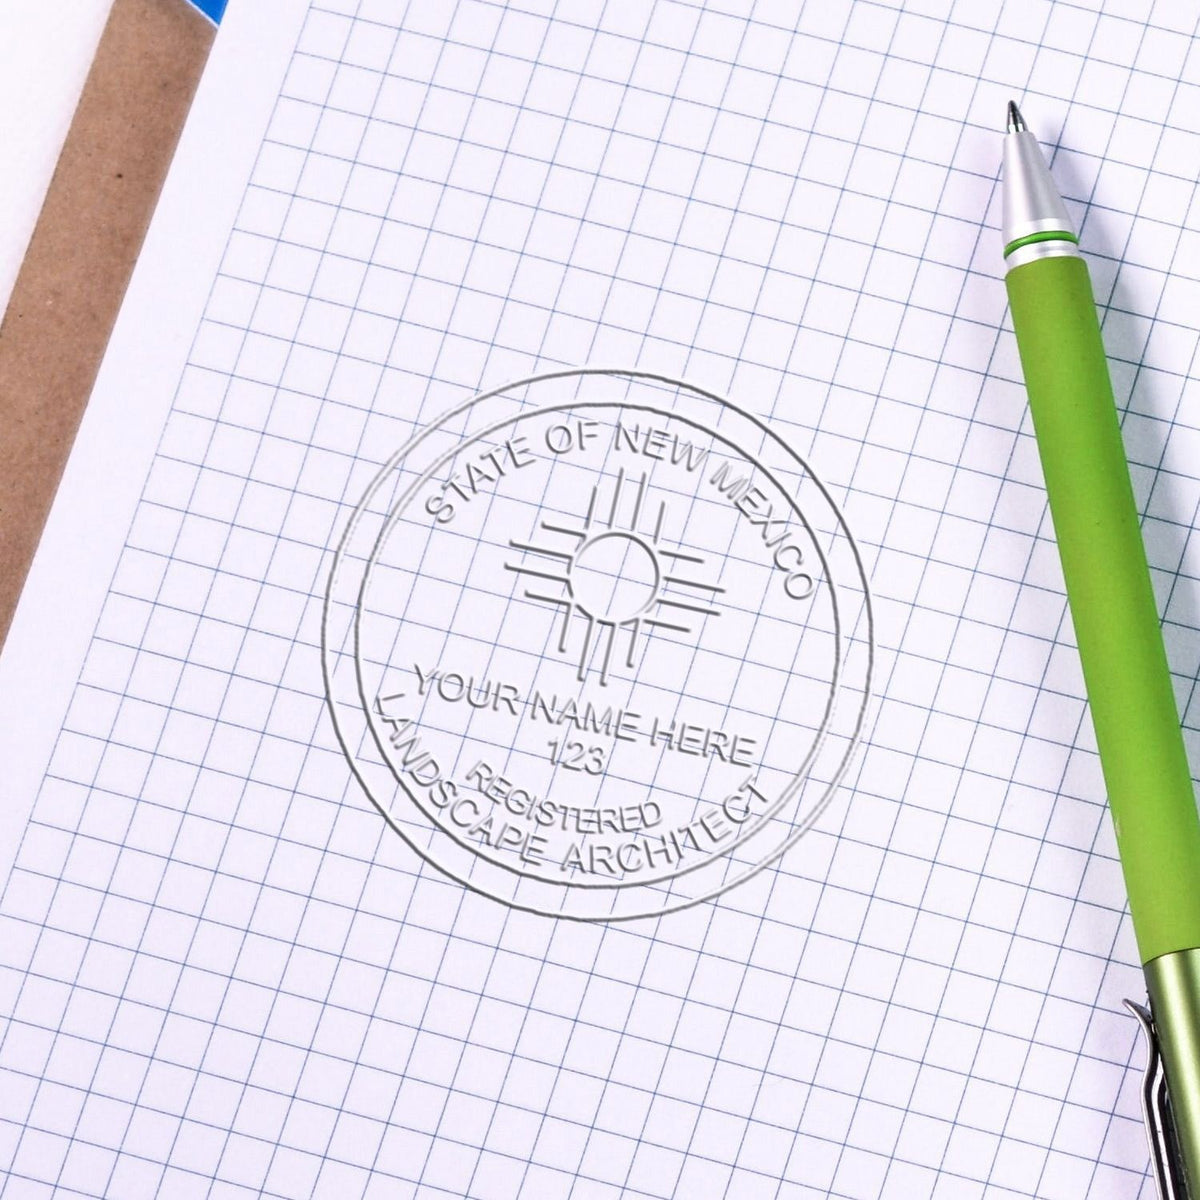 Another Example of a stamped impression of the Hybrid New Mexico Landscape Architect Seal on a office form